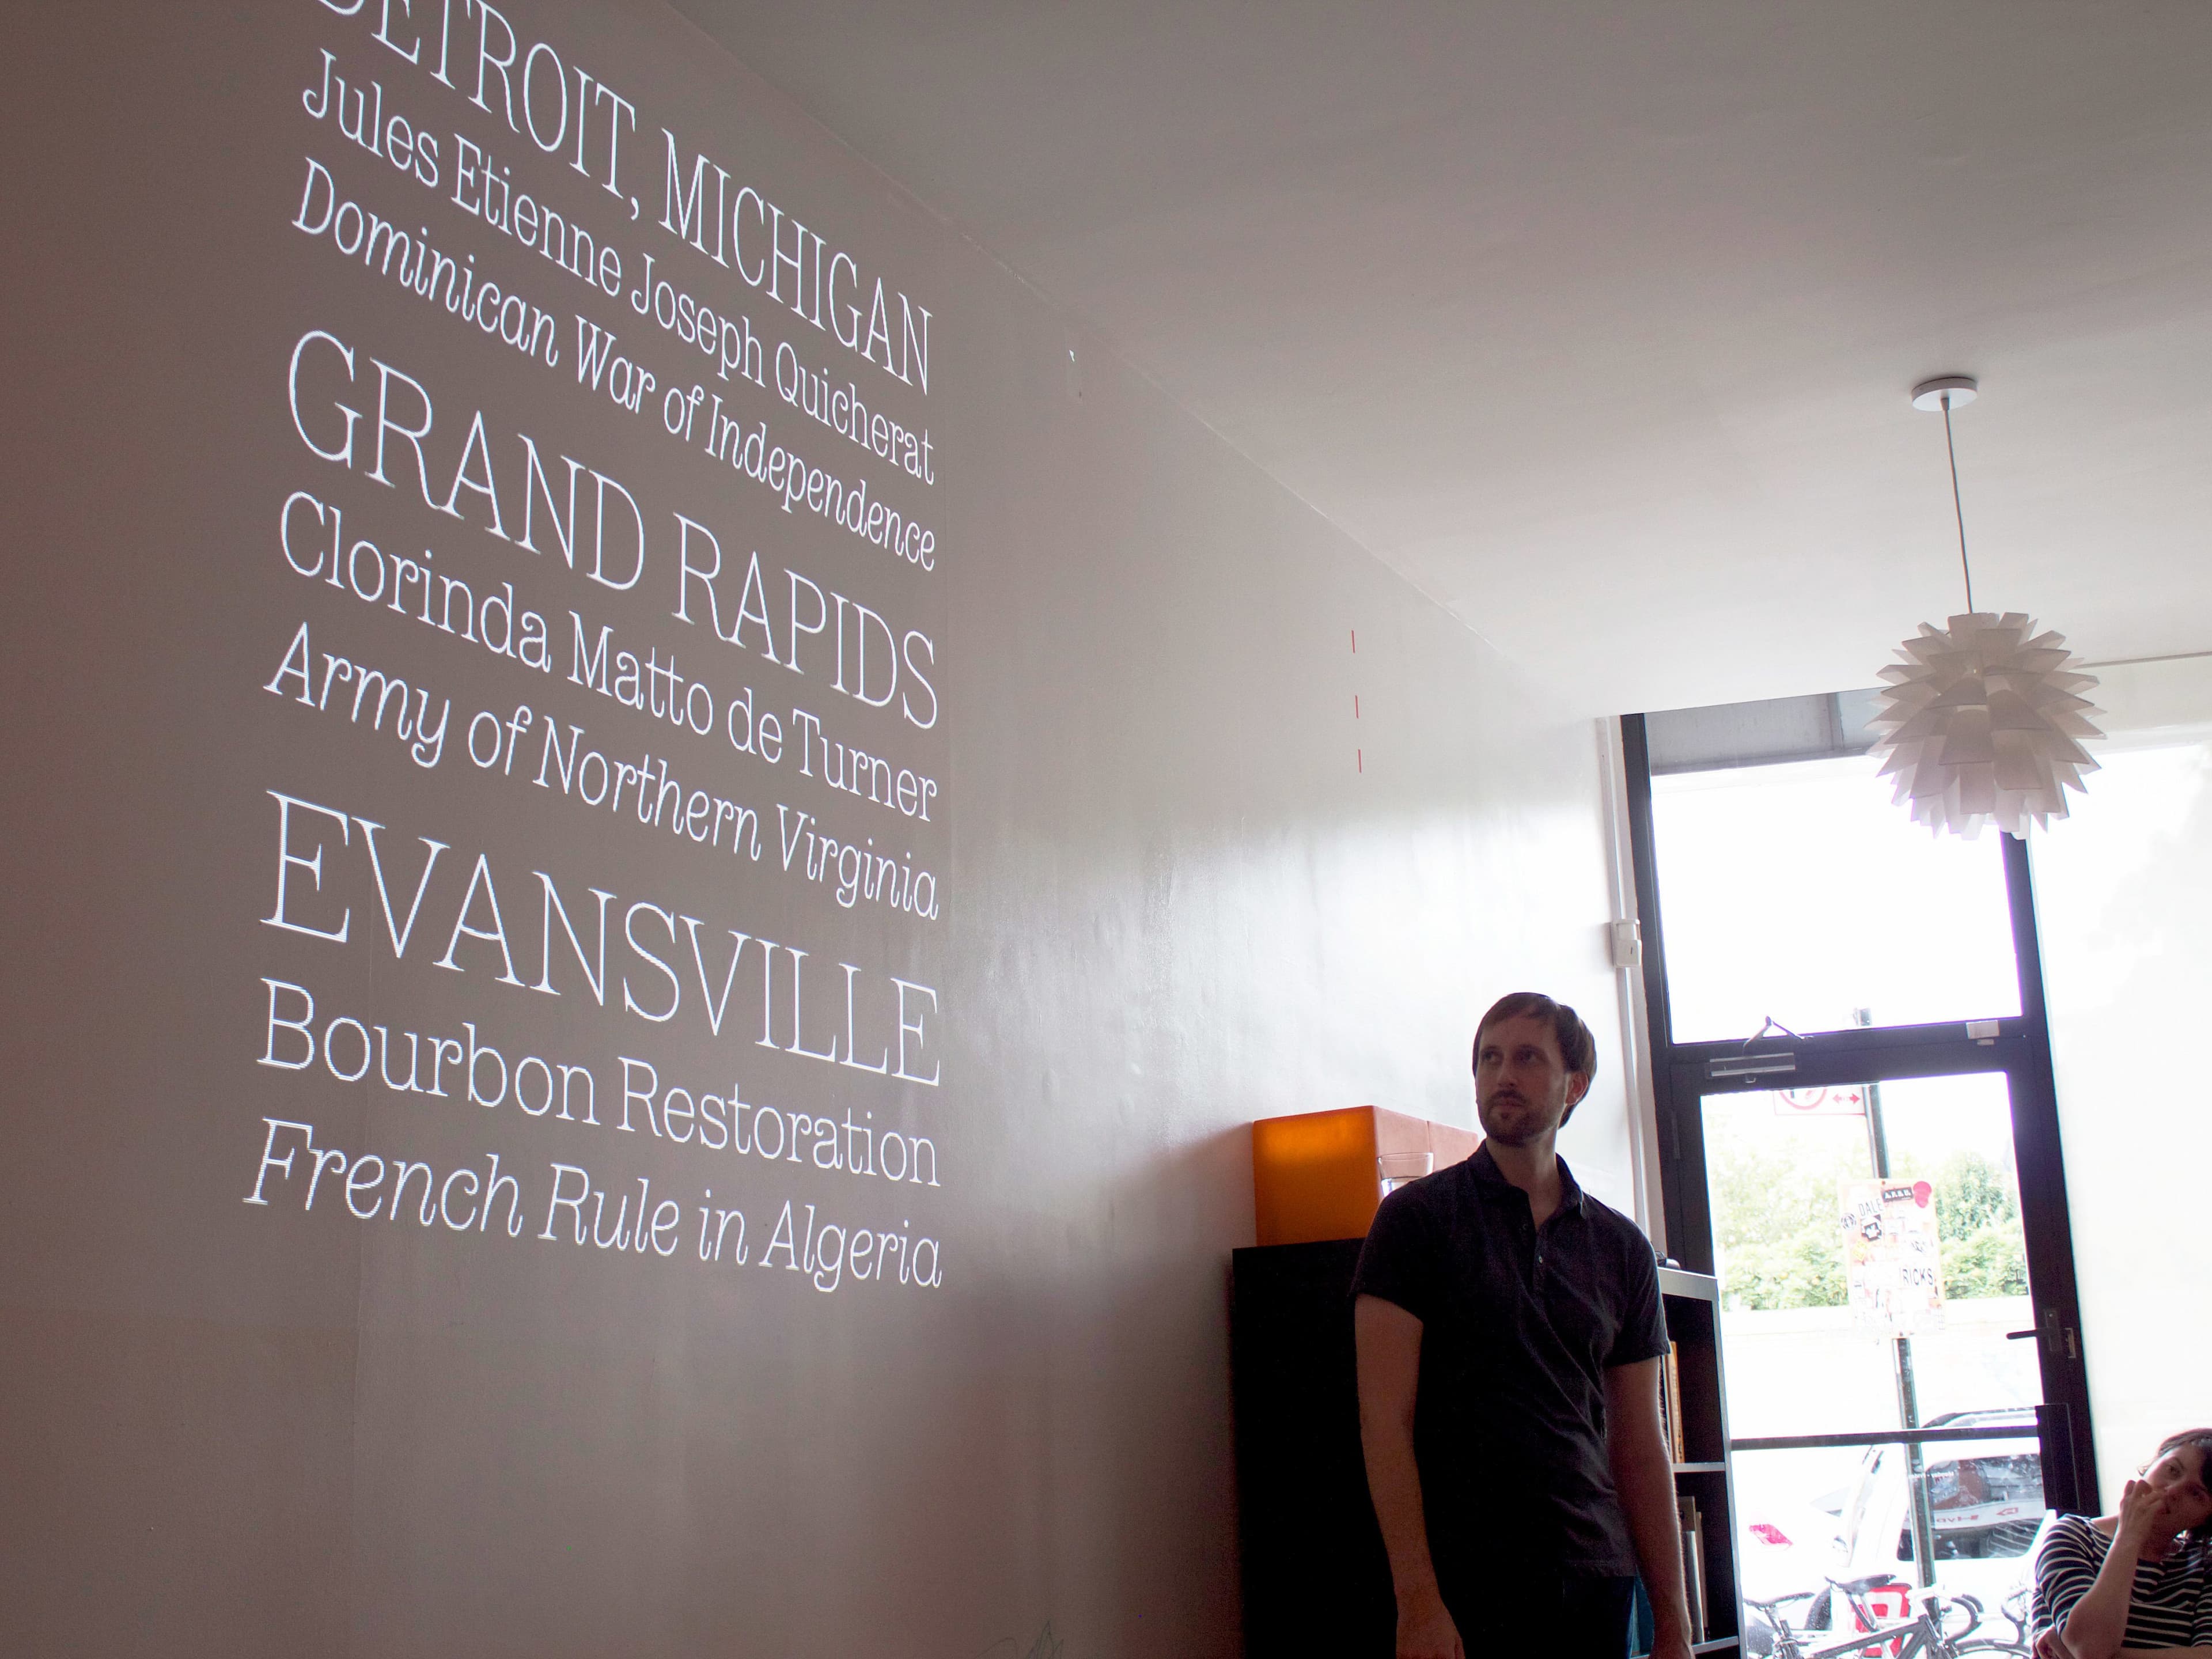 A man, standing in a room with a modern ceiling light fixture, looks up at projected text on the wall. The text includes locations such as Detroit, Michigan, and Grand Rapids, along with historical references like the Dominican War of Independence and French Rule in Algeria.